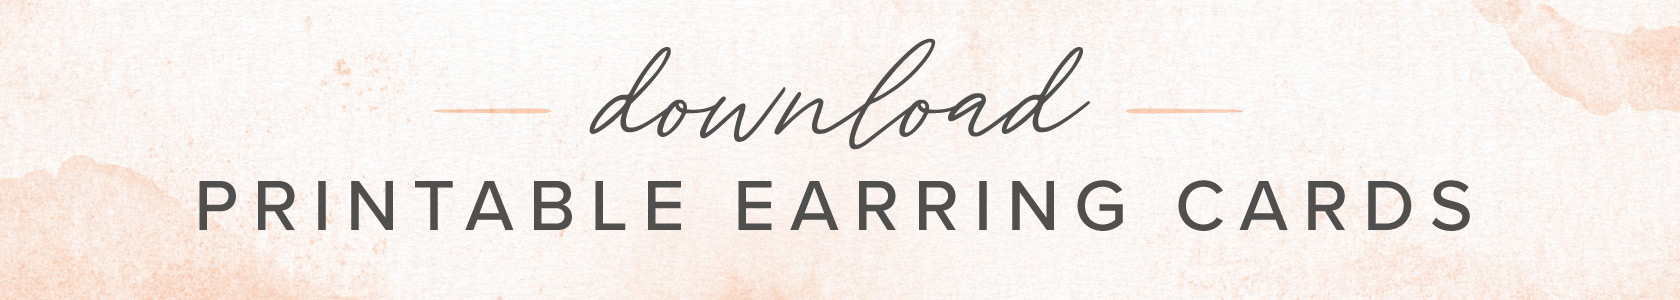 download earring cards